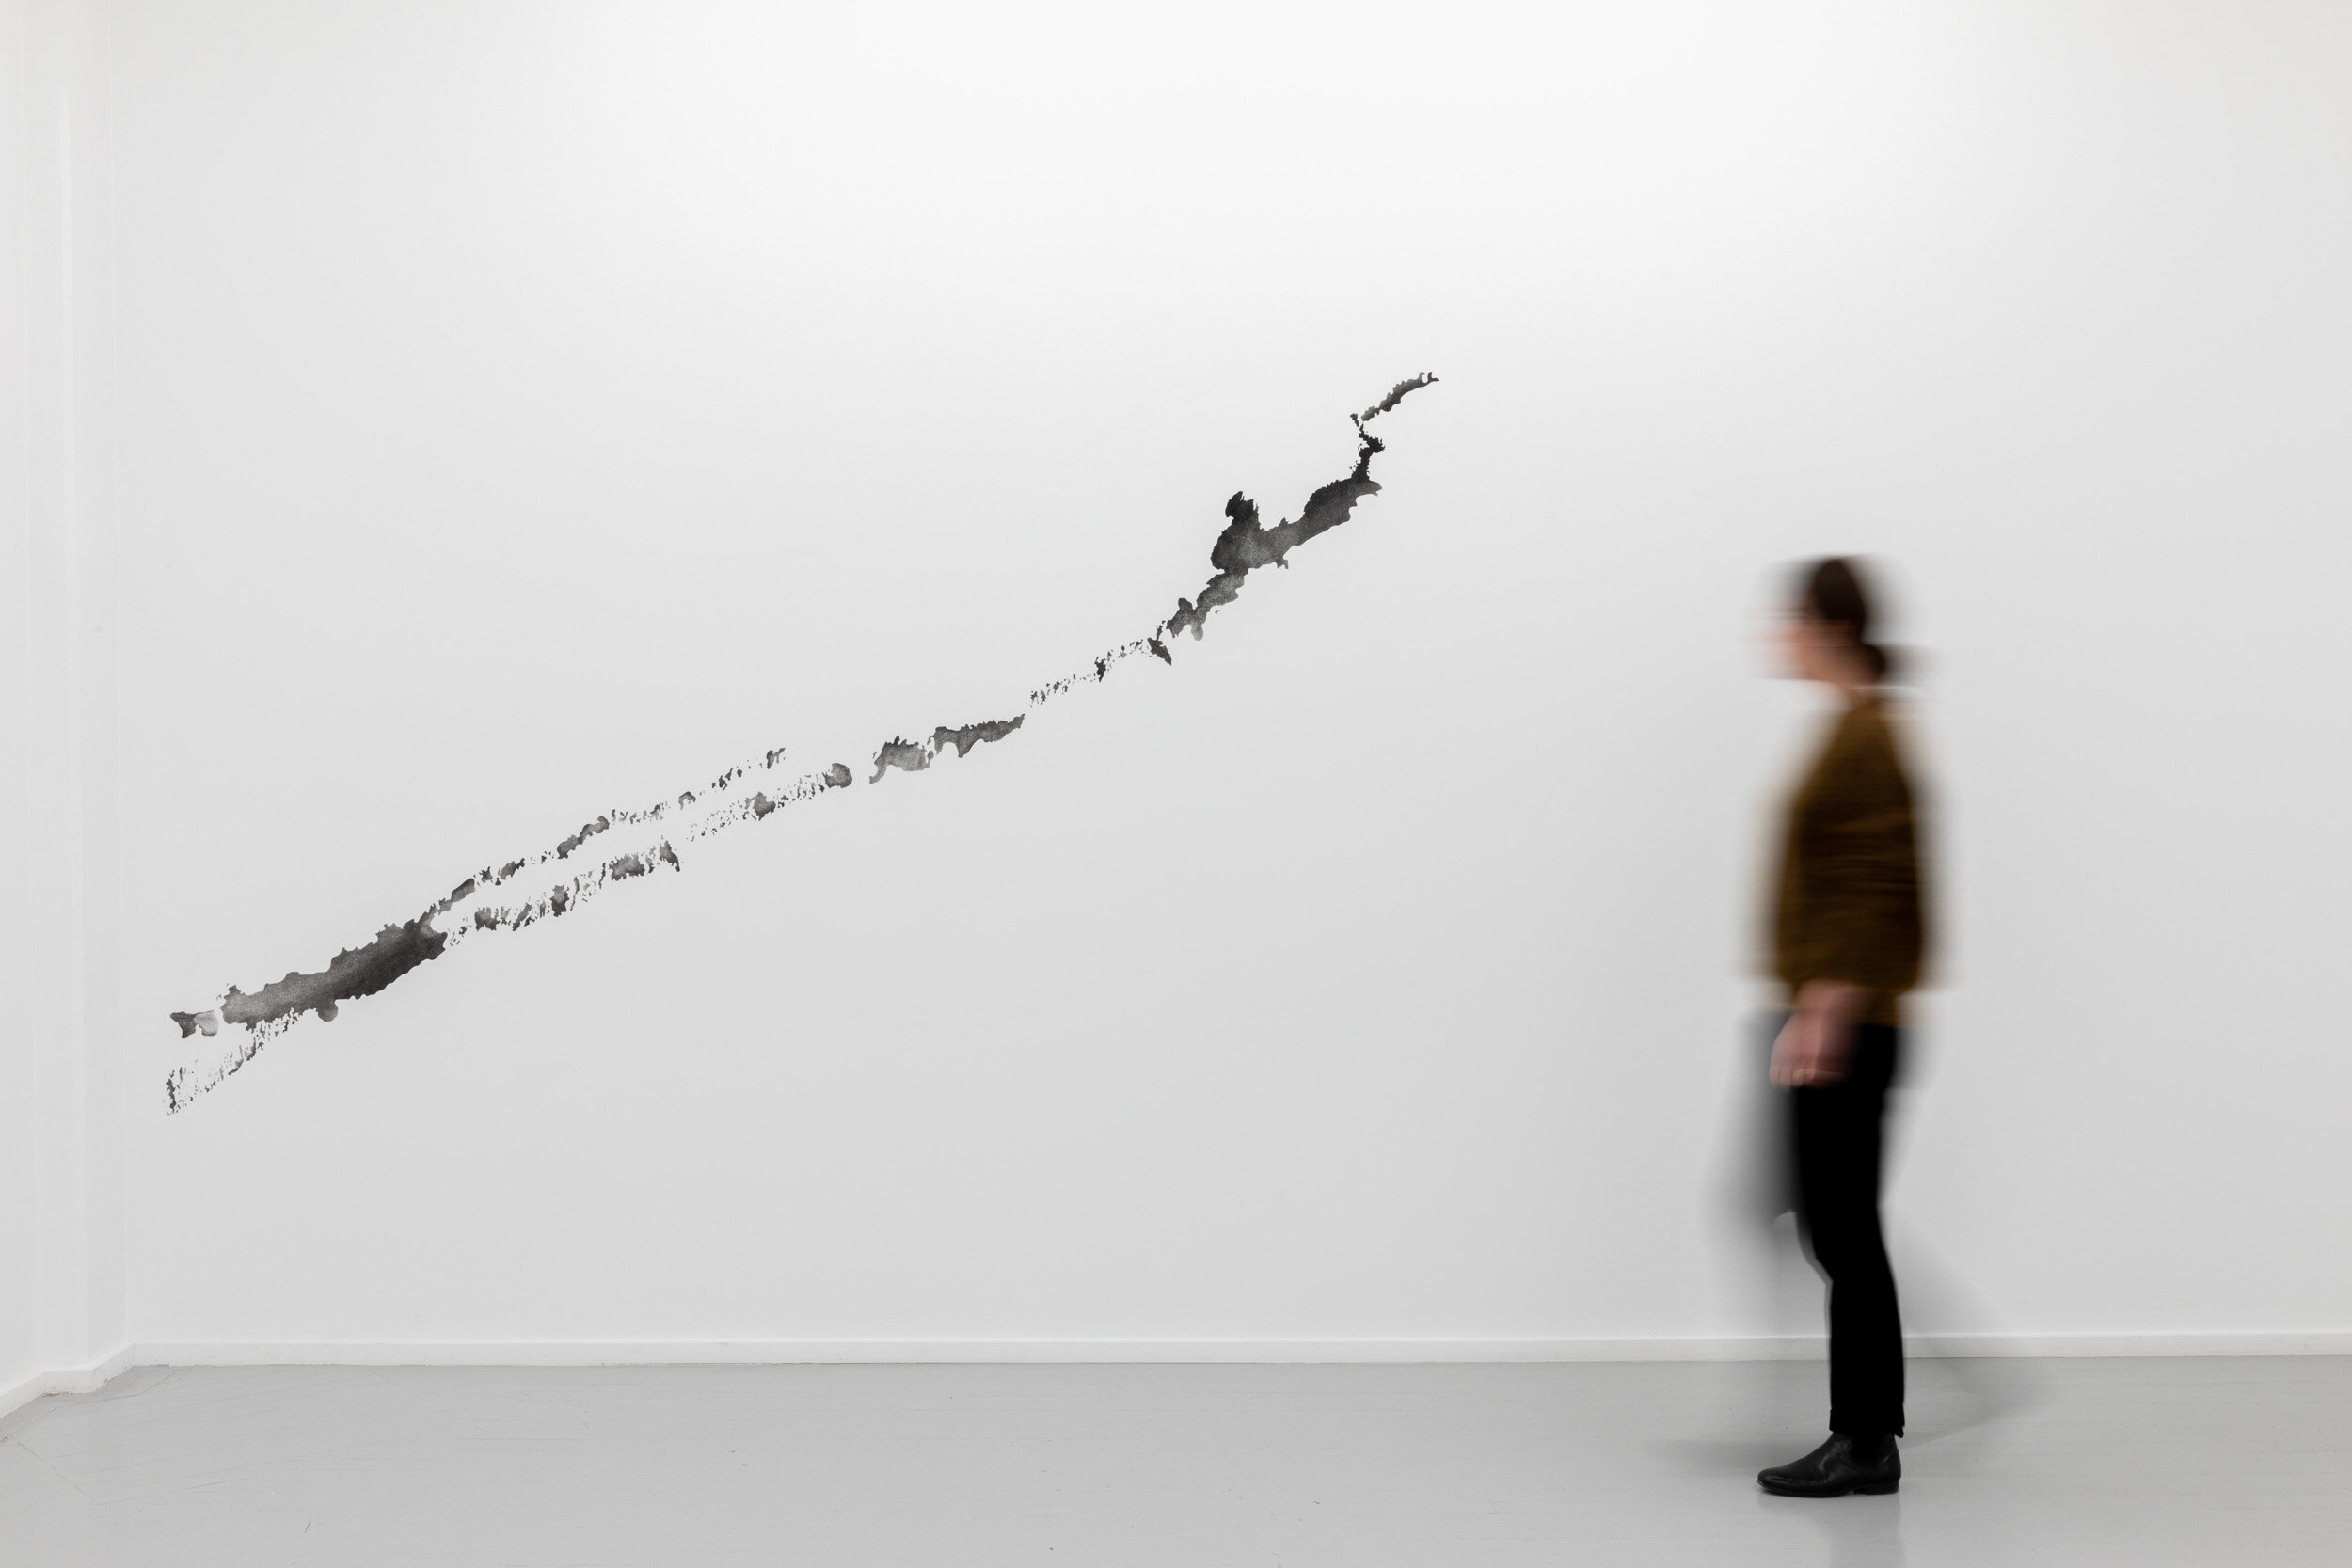  Wall Drawing for Galleri Riis II, 2019. Crayon on wall, H 334 x W 507 cm. Unique. Installation view Jan Groth ‘Signs and Figures’, Galleri Riis, Oslo 2019. Photo: Adrian Bugge 